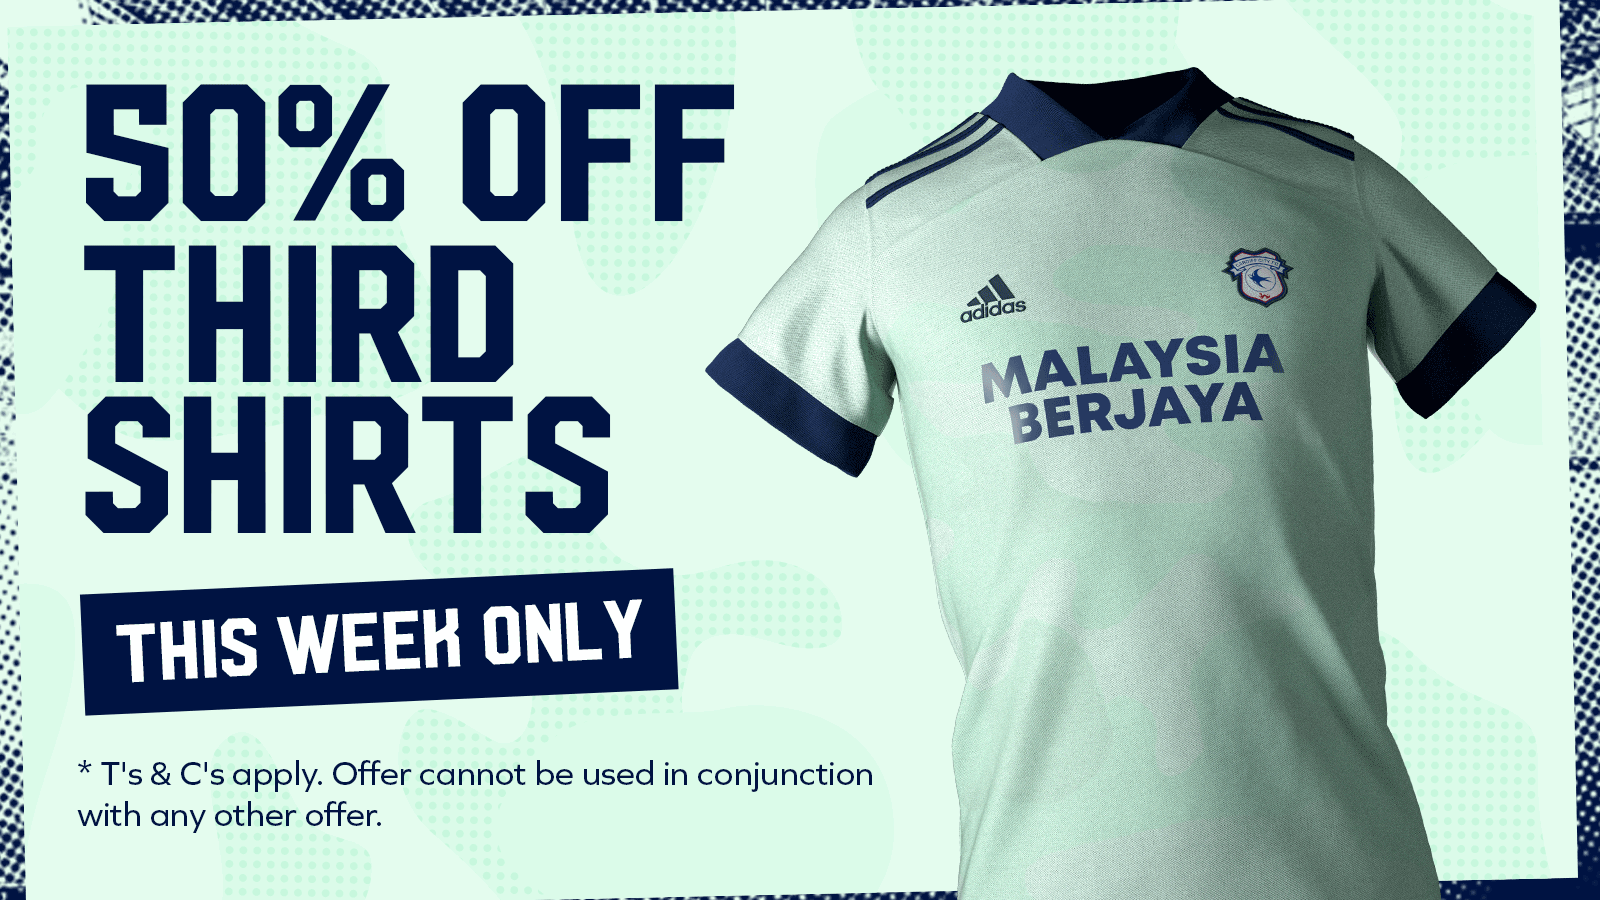 Get 50% off our Third Shirts!